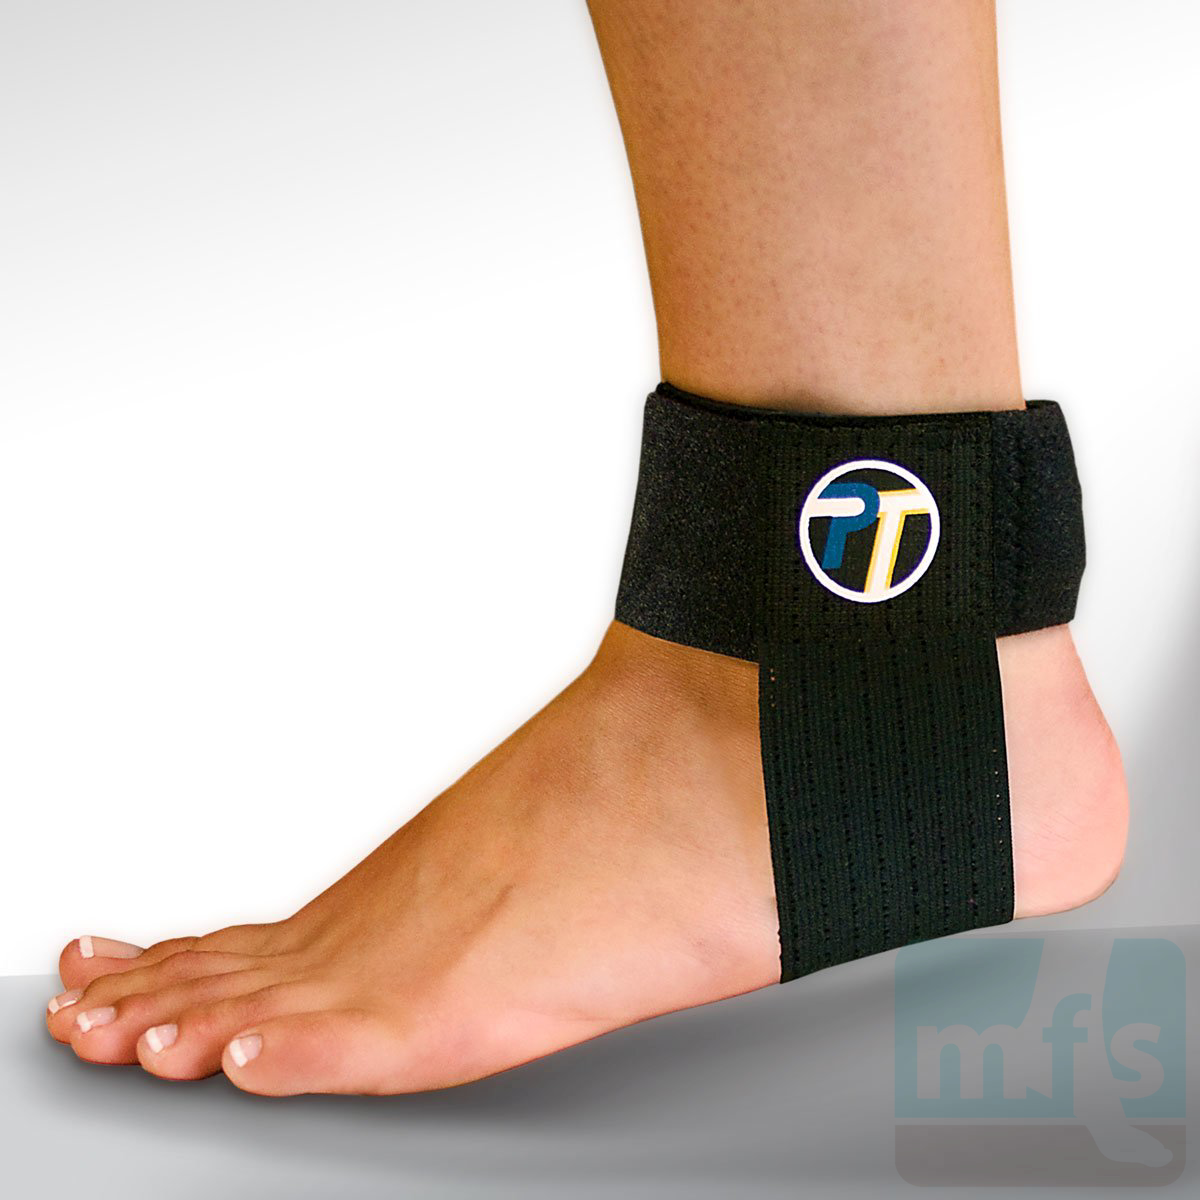 Achilles Tendon Support by ProTec